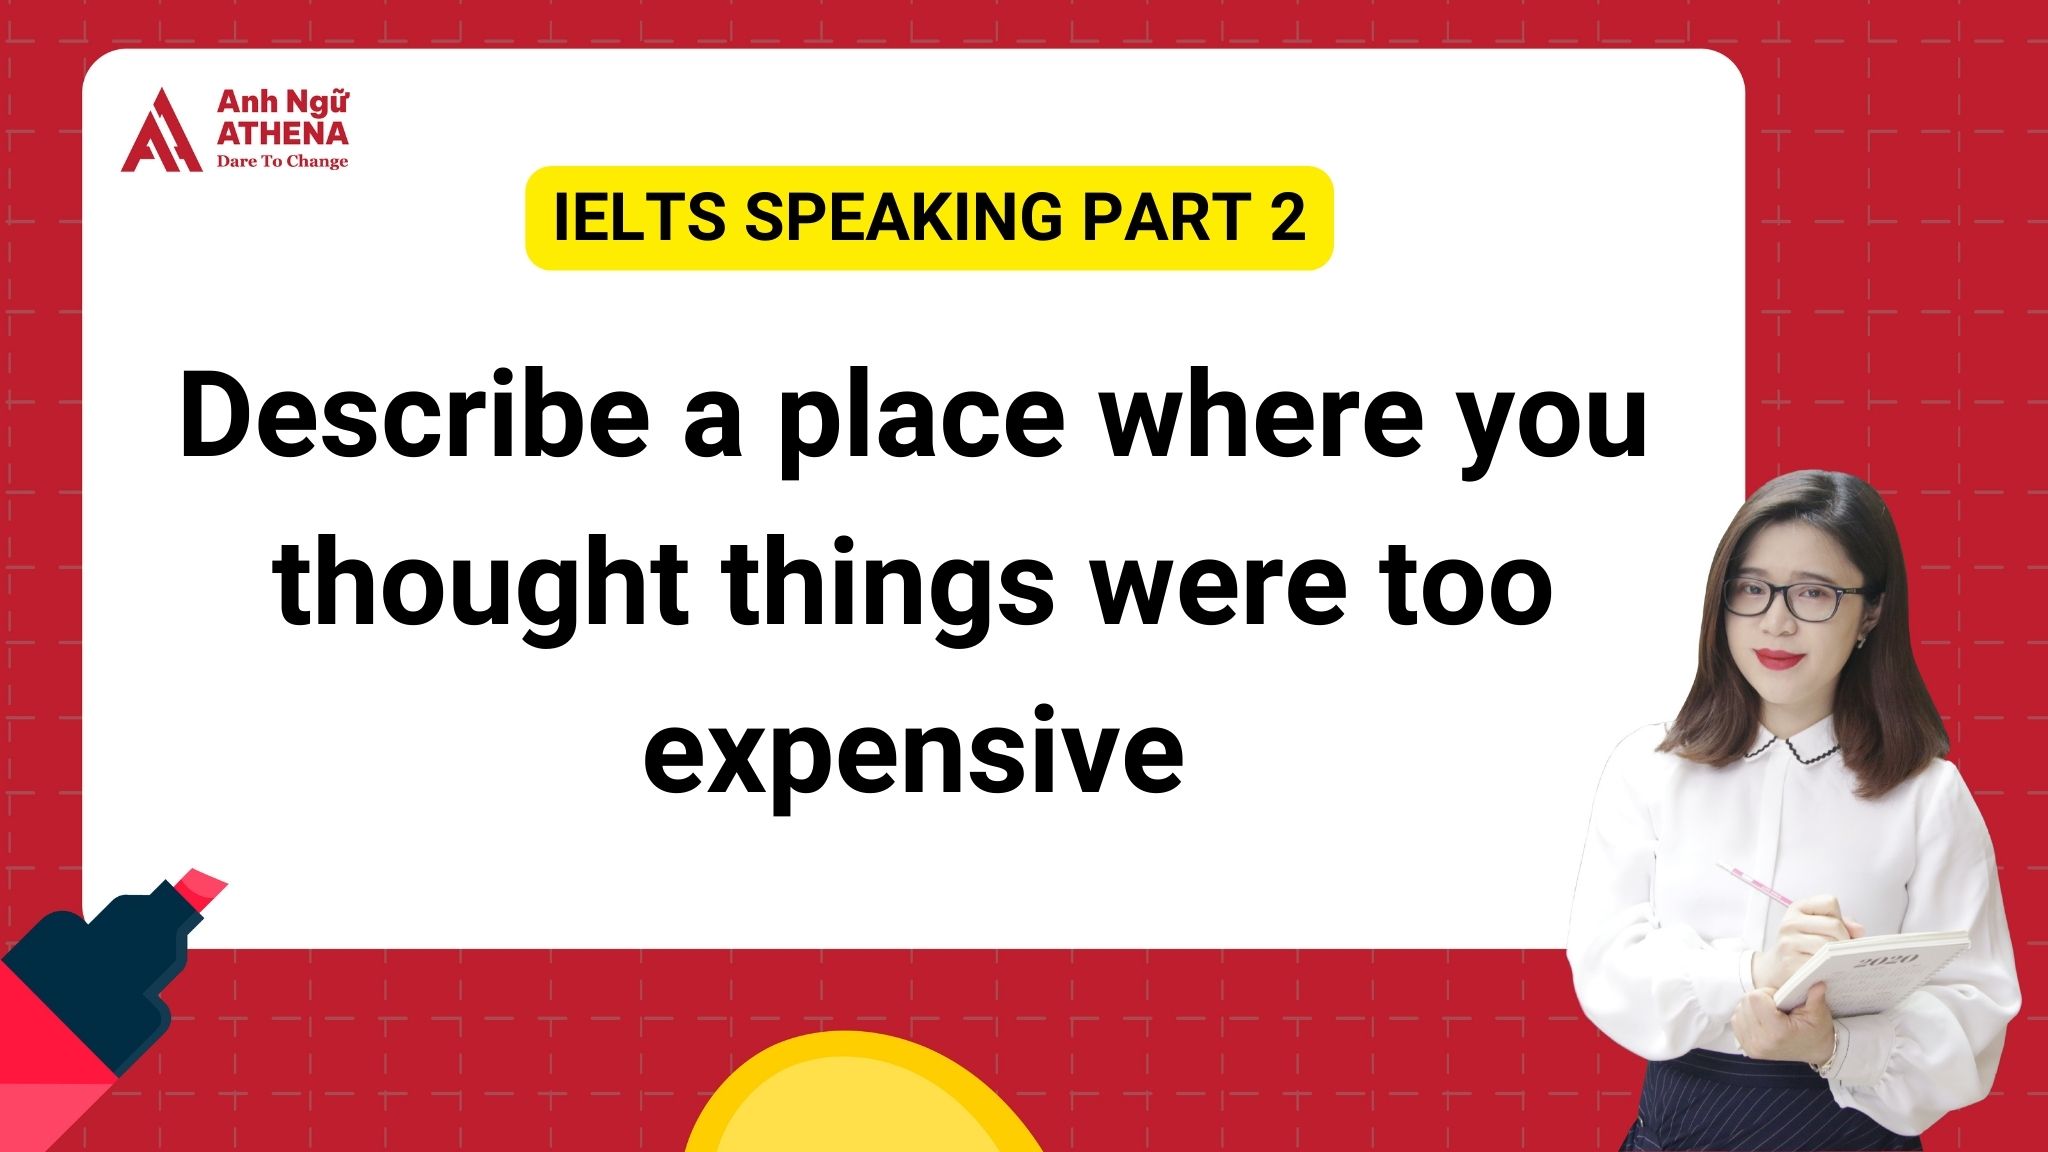 Giải đề IELTS Speaking Part 2: Describe a place where you thought things were too expensive